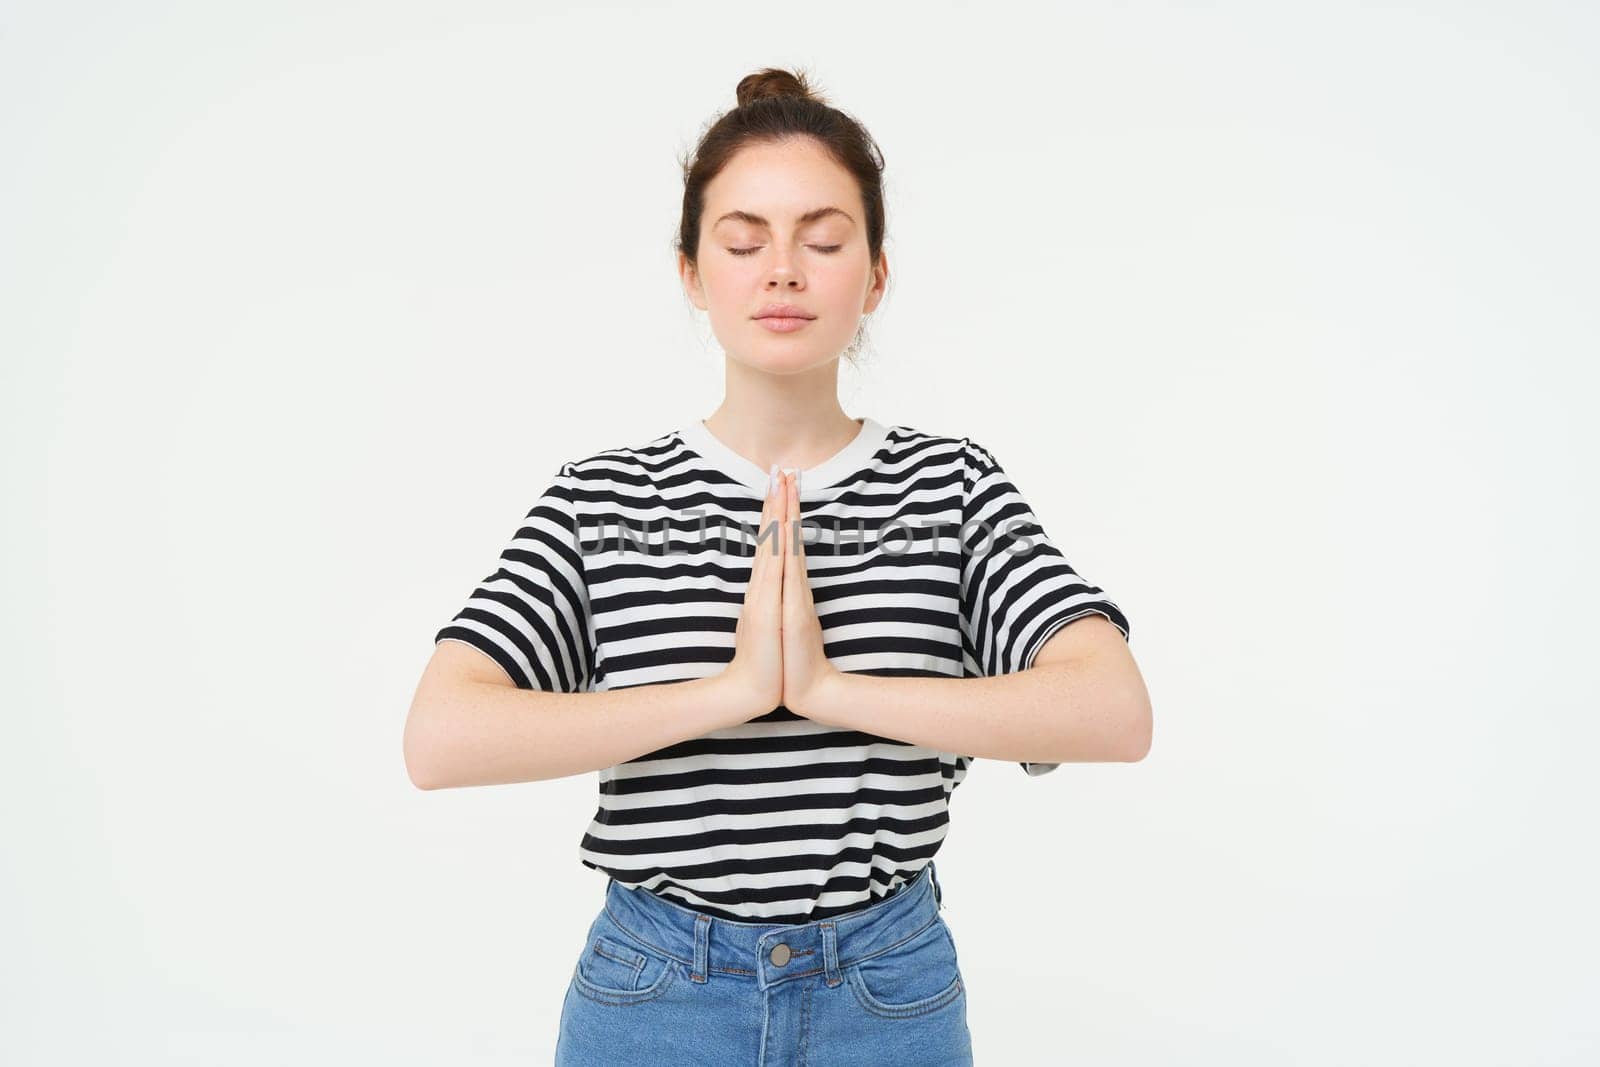 Portrait of young mindful woman meditating, holds hands clasped together, namaste gesture, practice yoga, standing over white background.